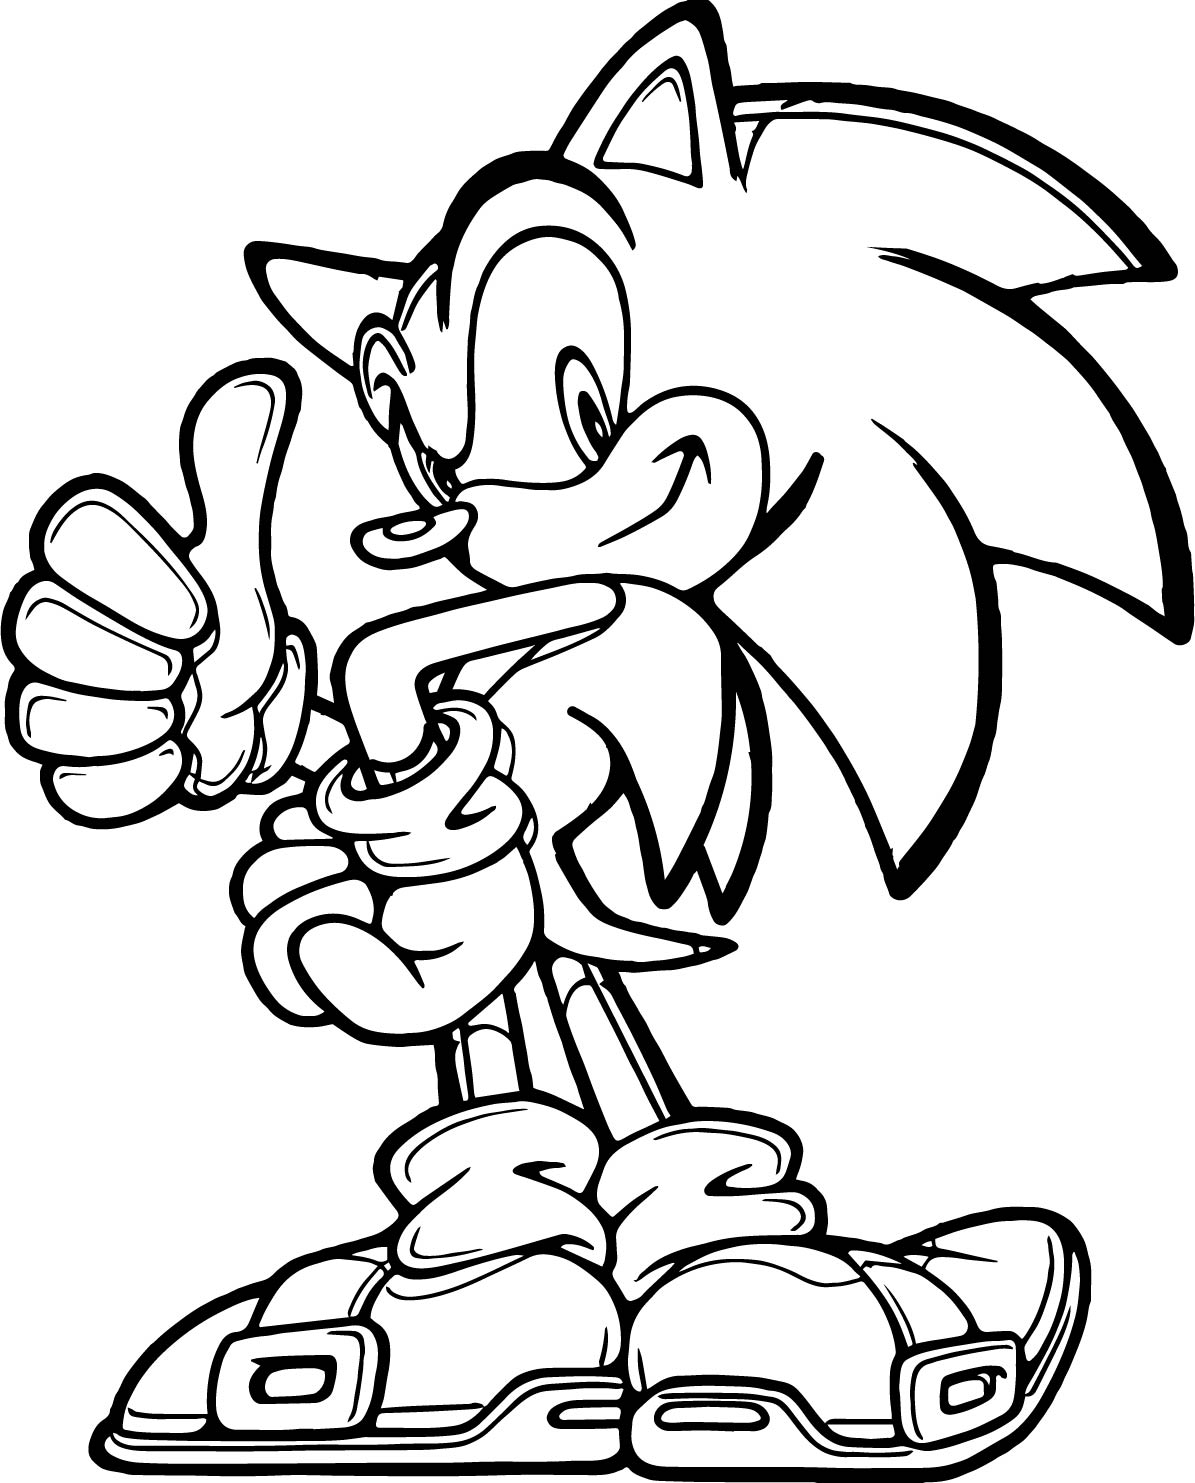 Sonic Exe Coloring Pages At GetDrawings   Free Download   Coloring ...